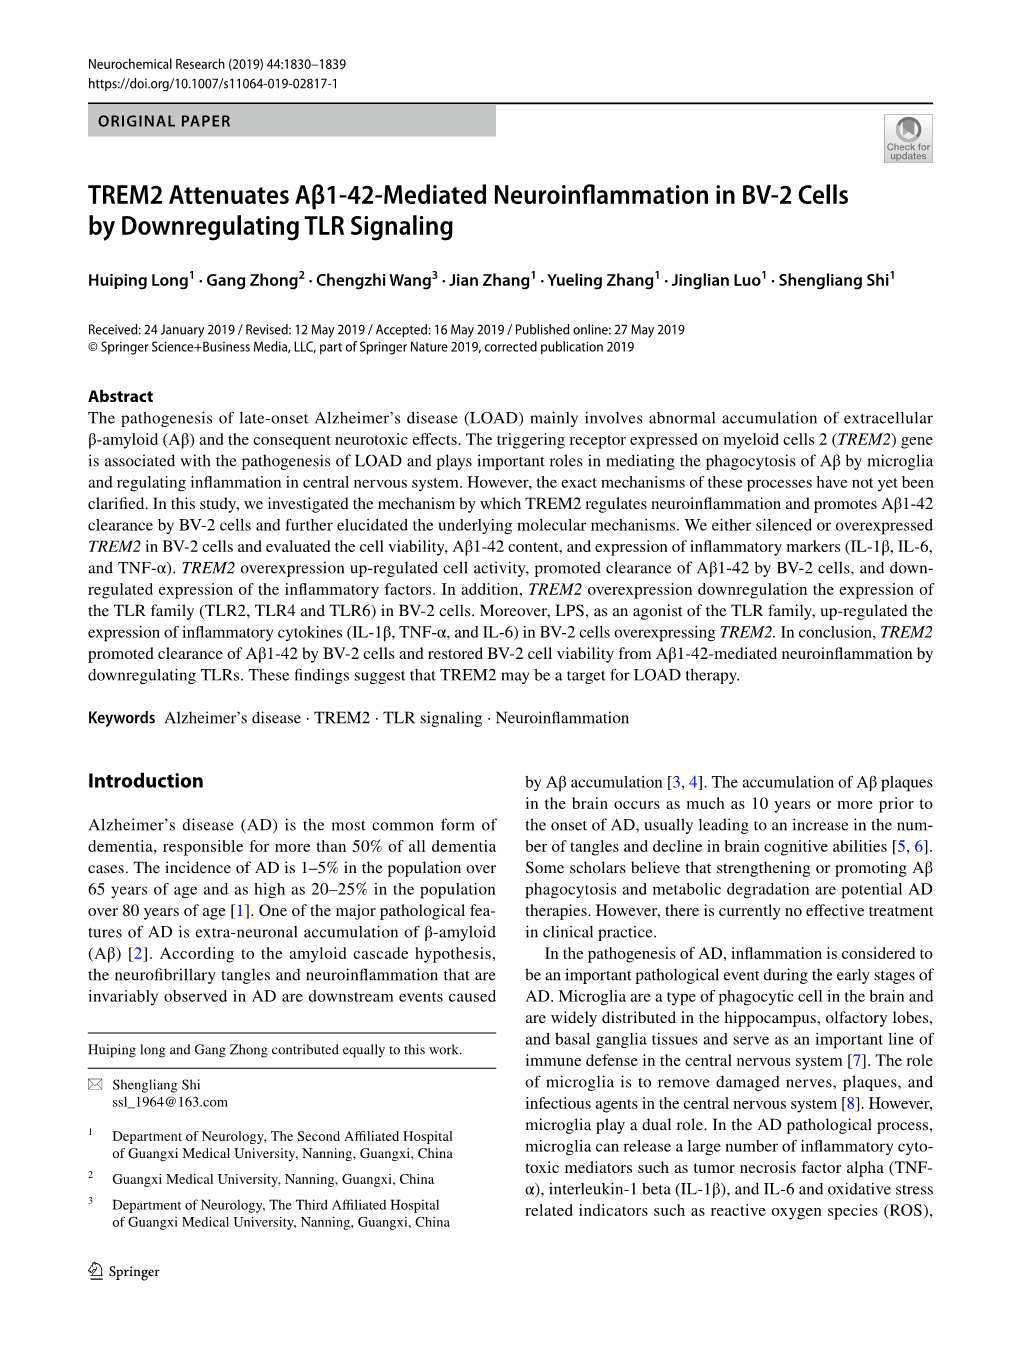 TREM2 Attenuates Aβ1-42-Mediated Neuroinflammation in BV-2 Cells By